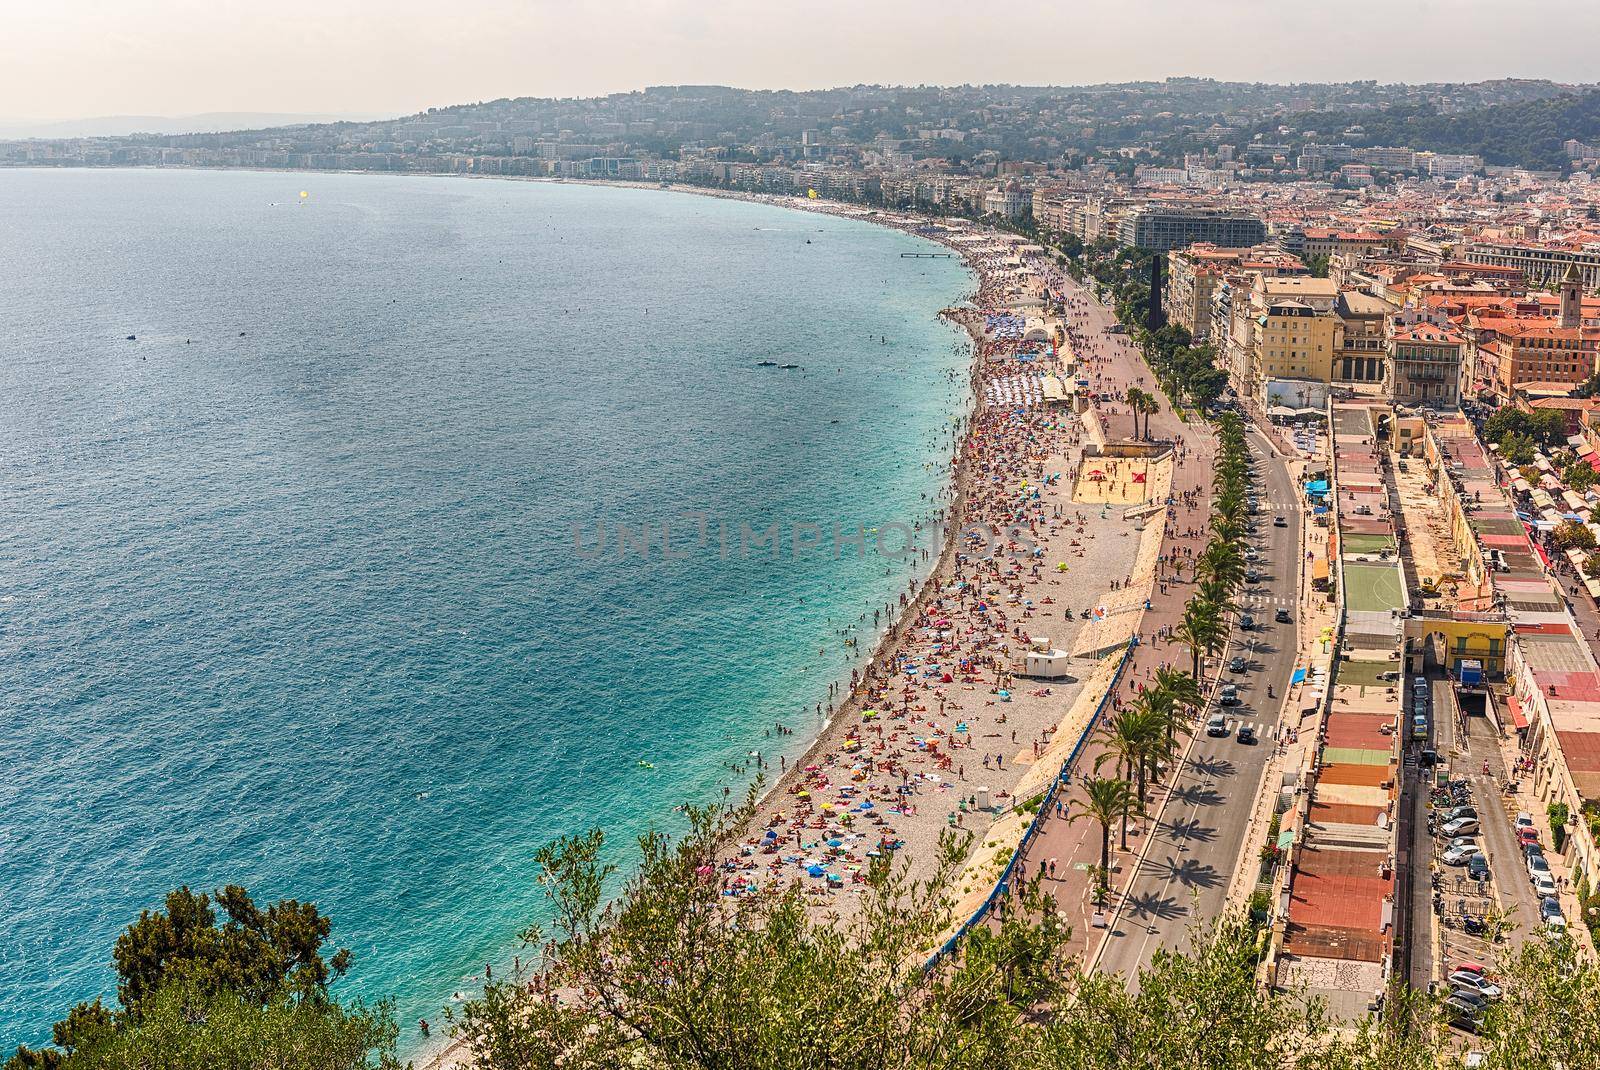 Scenic aerial view of the waterfront and the Promenade des Anglais from the Castle Hill in Nice, Cote d'Azur, France